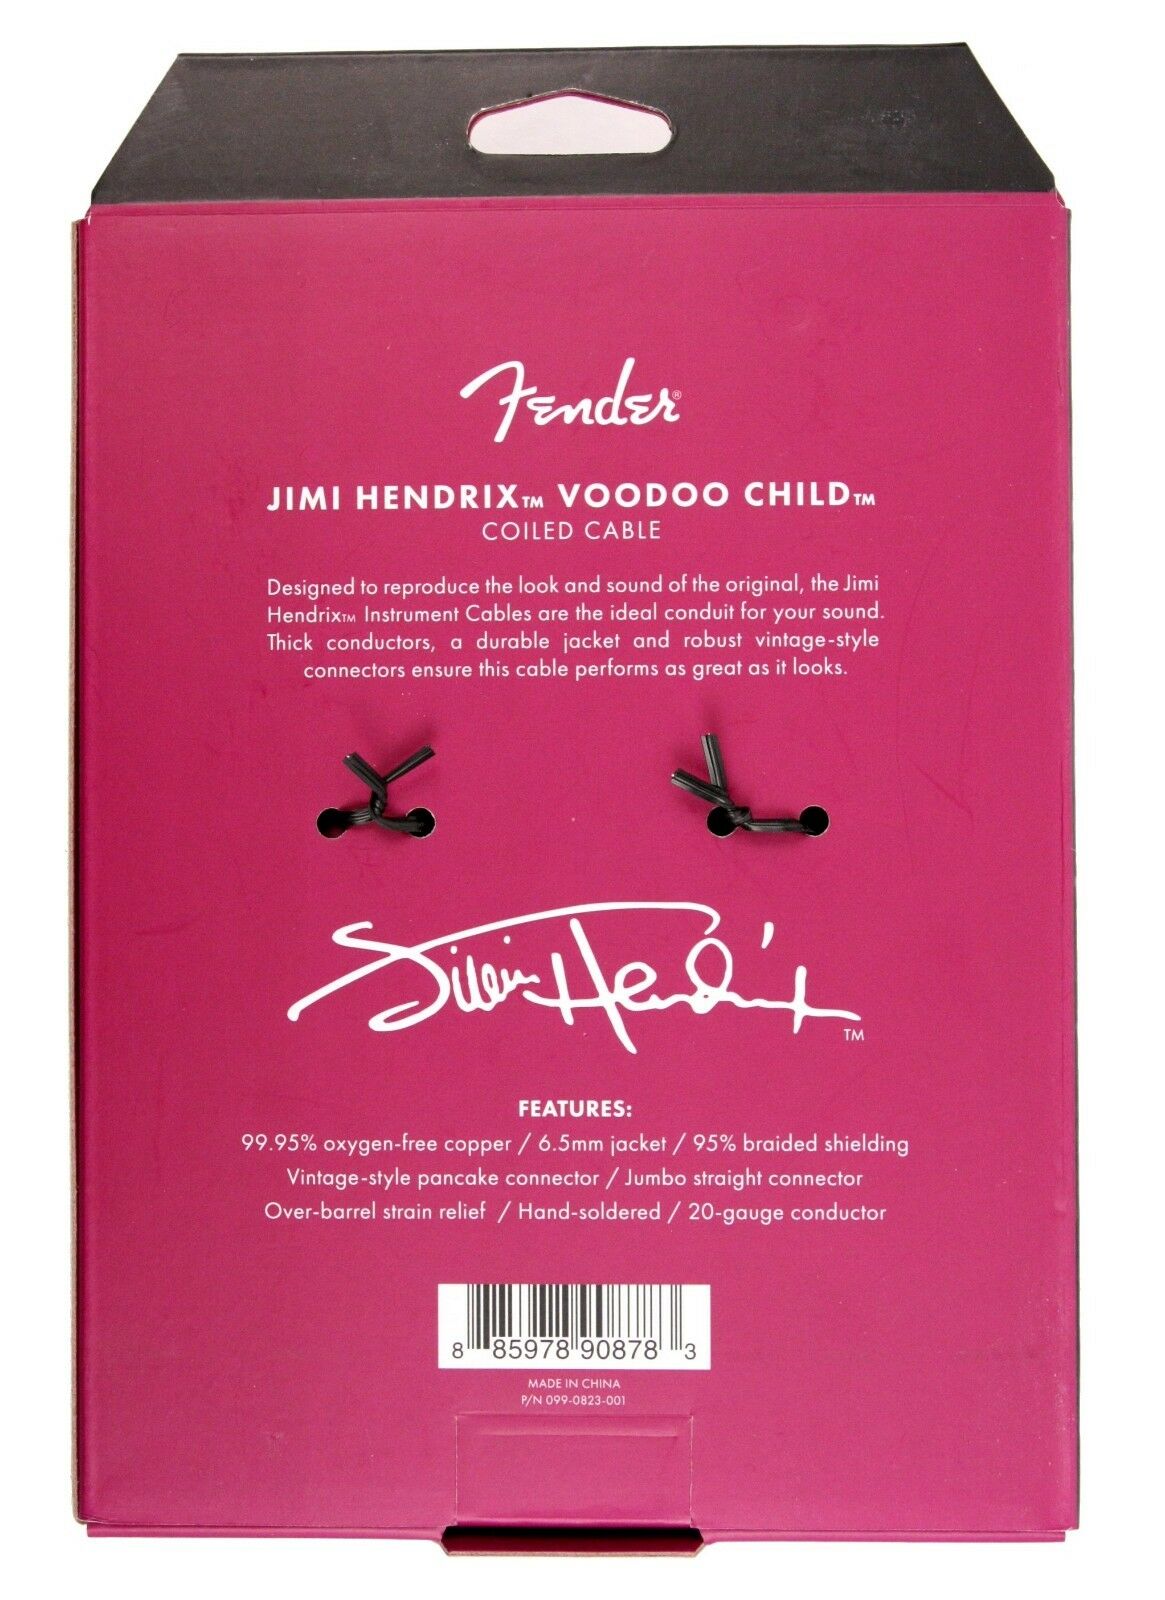 Fender Hendrix Voodoo Child Coiled Cable 30' - Purple, Straight to Angled